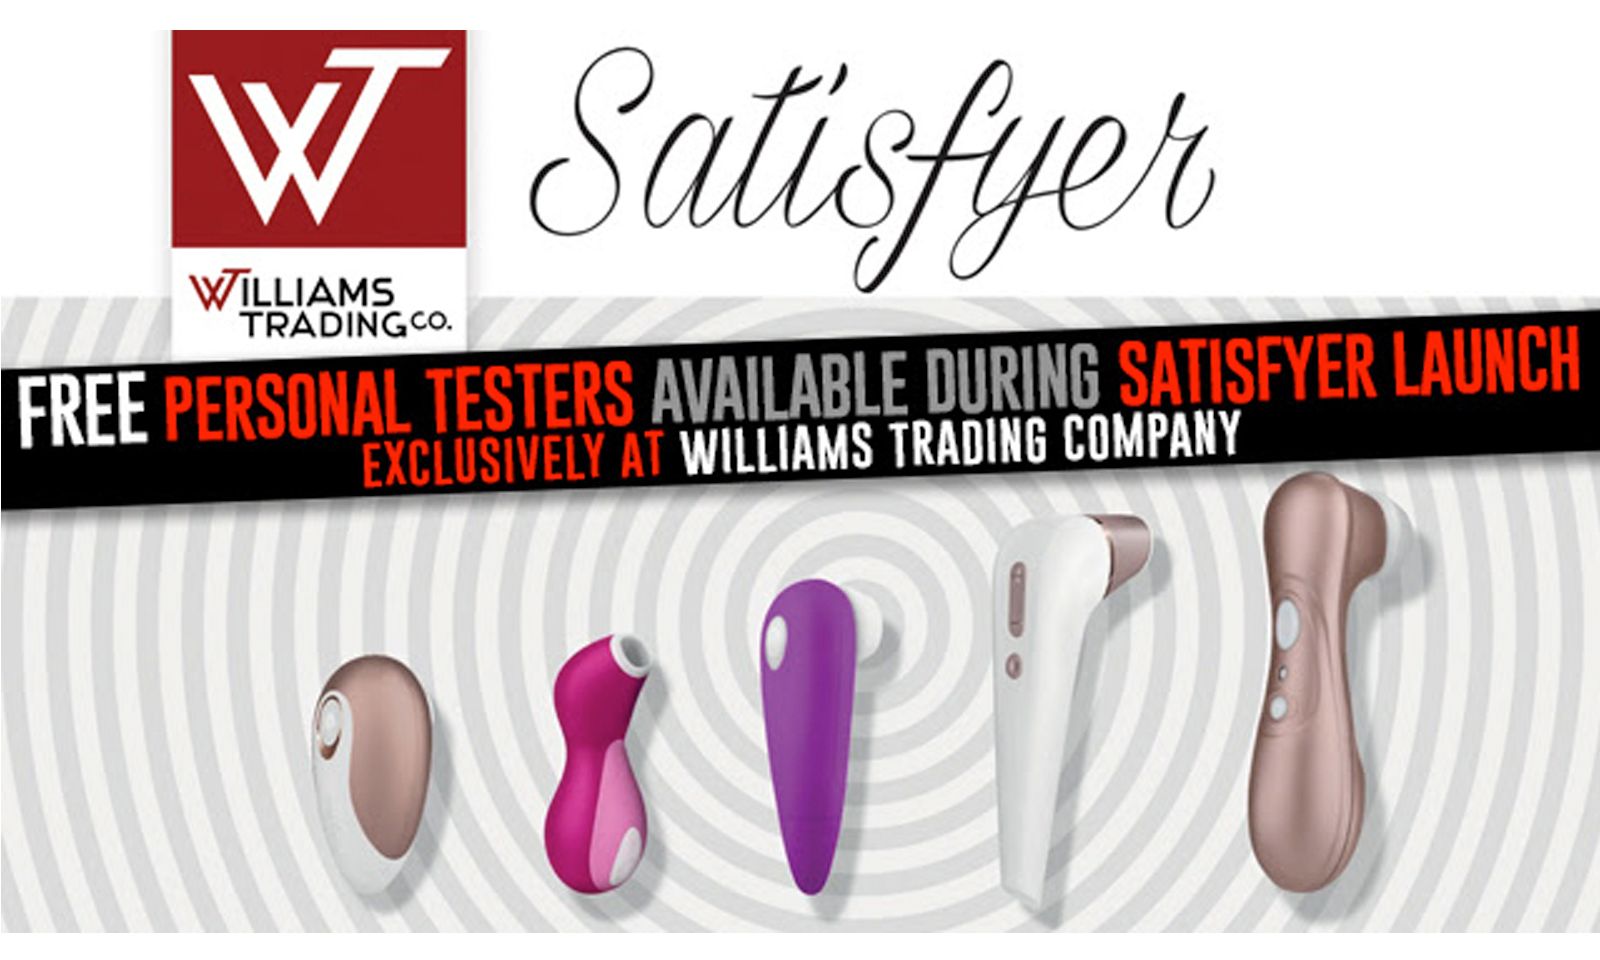 Williams Trading Offering Free Testers During Satisfyer Launch